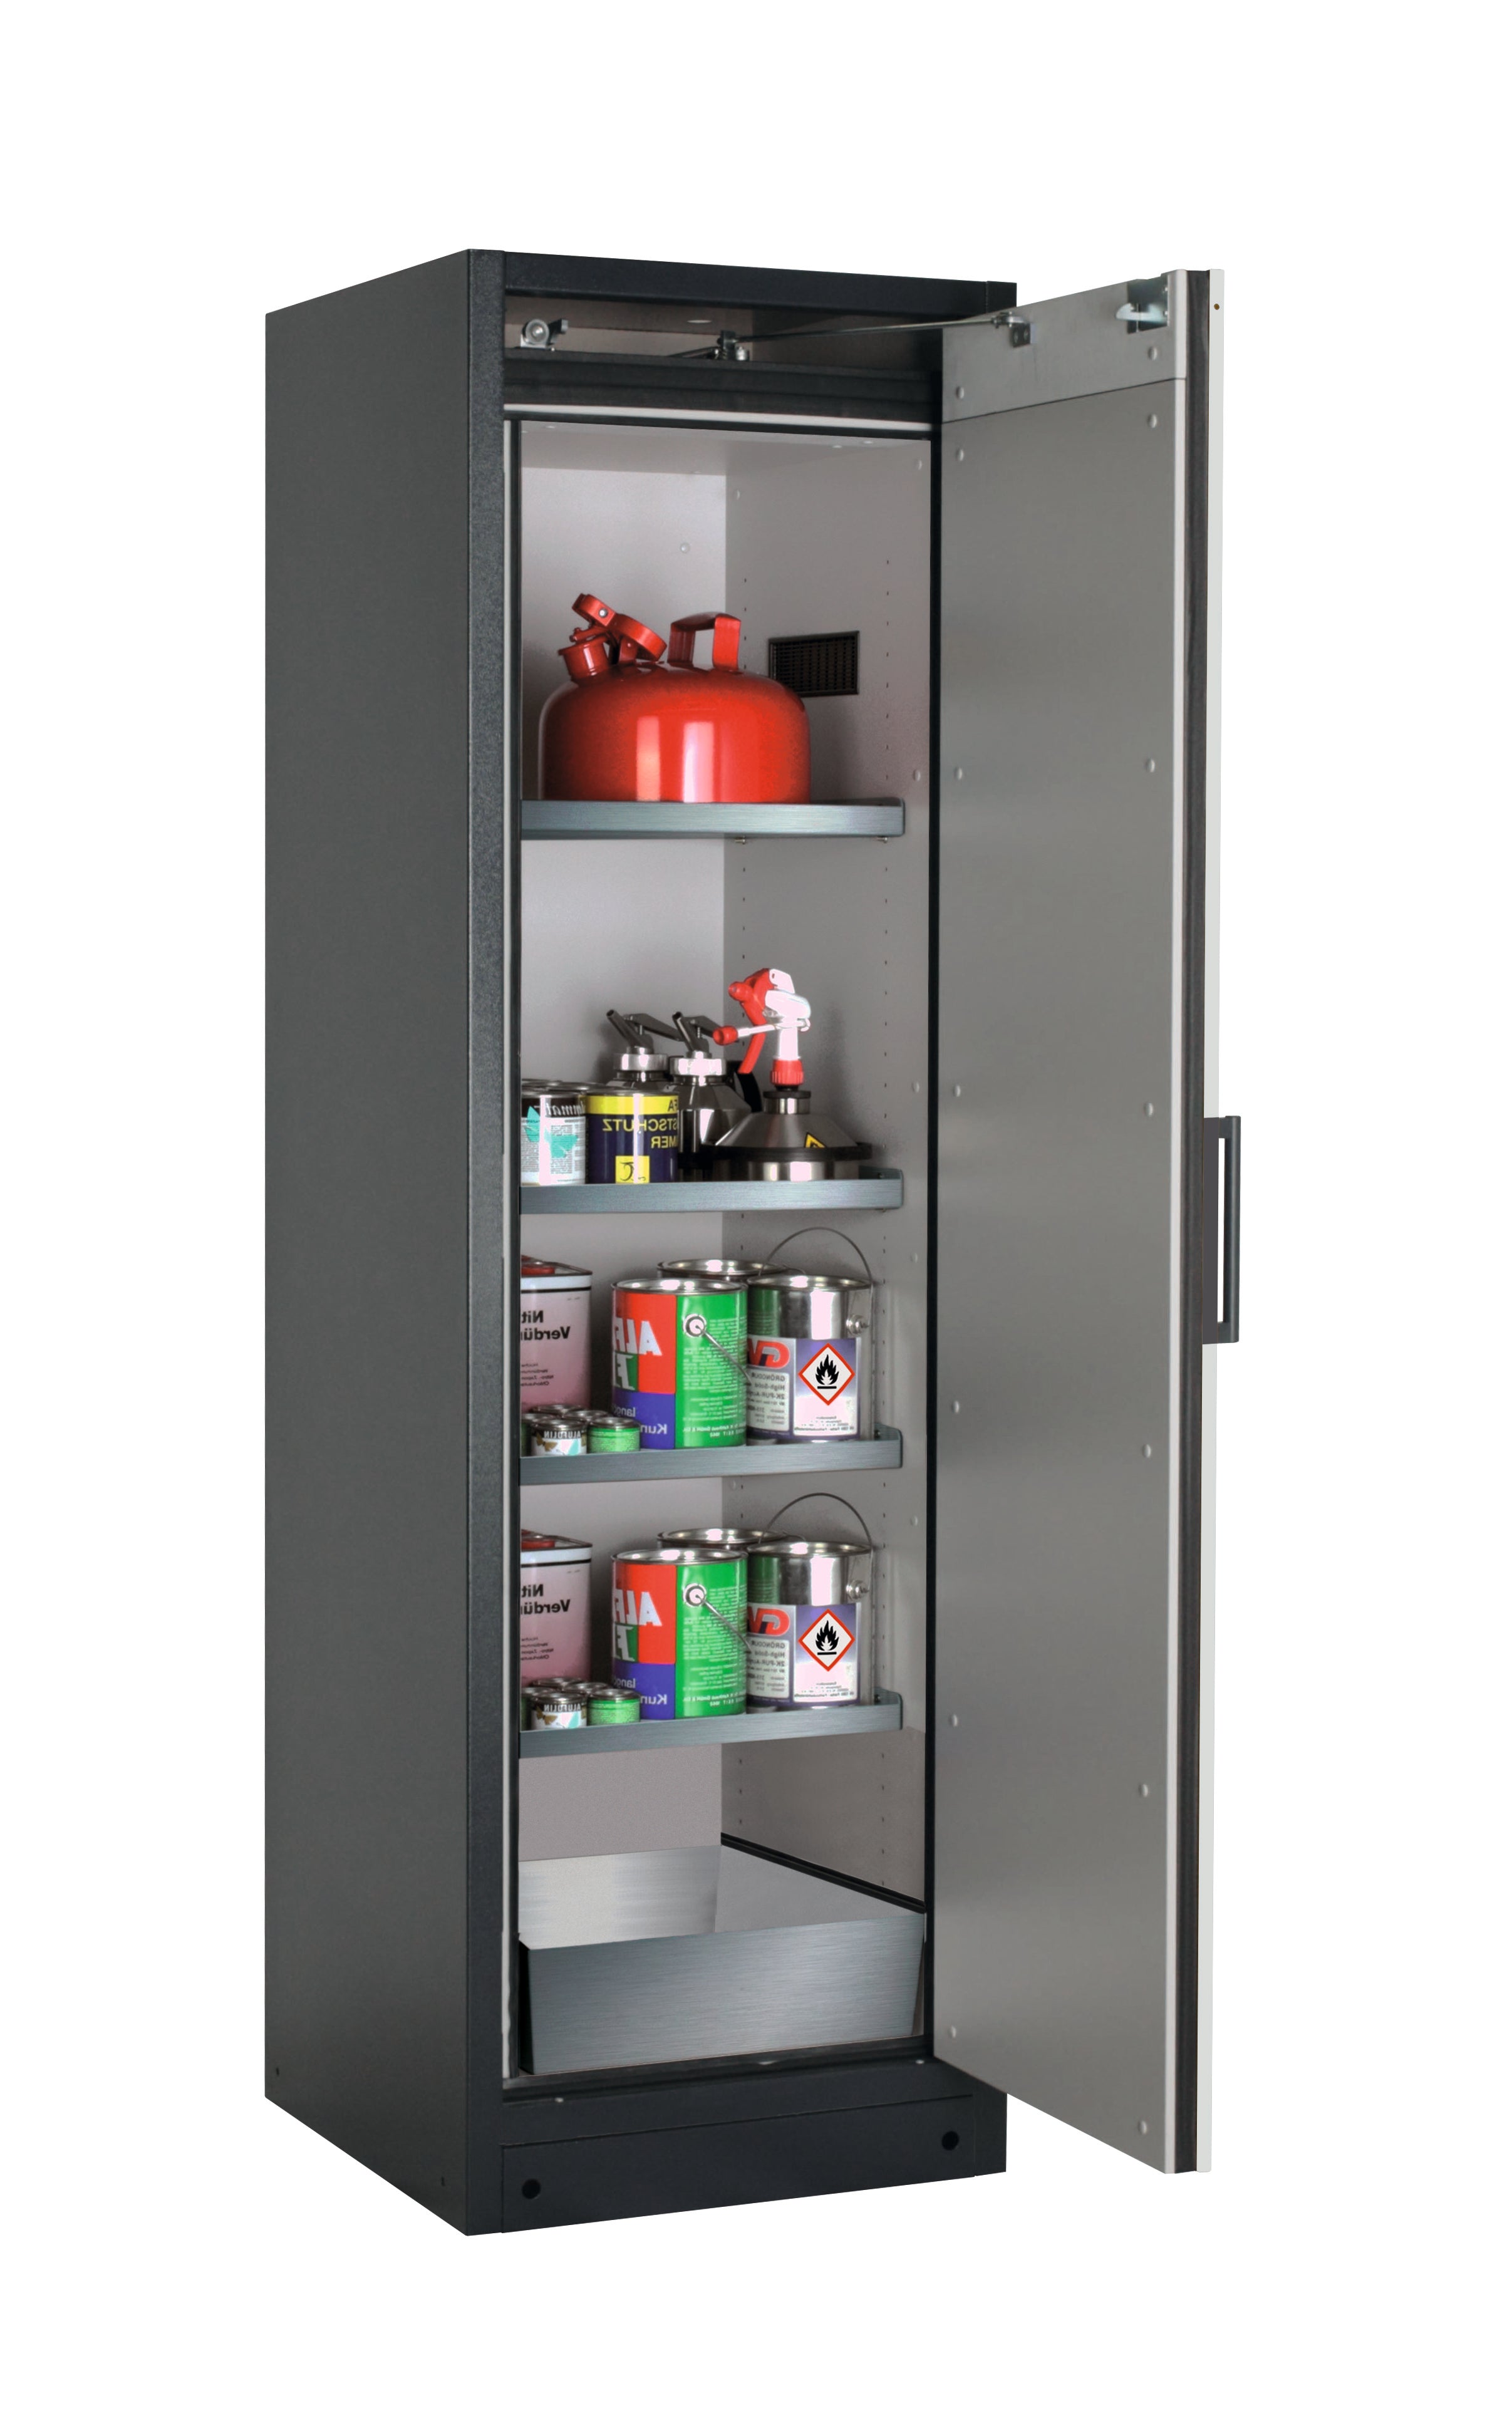 Type 90 safety storage cabinet Q-PEGASUS-90 model Q90.195.060.WDACR in light grey RAL 7035 with 4x shelf standard (stainless steel 1.4301),